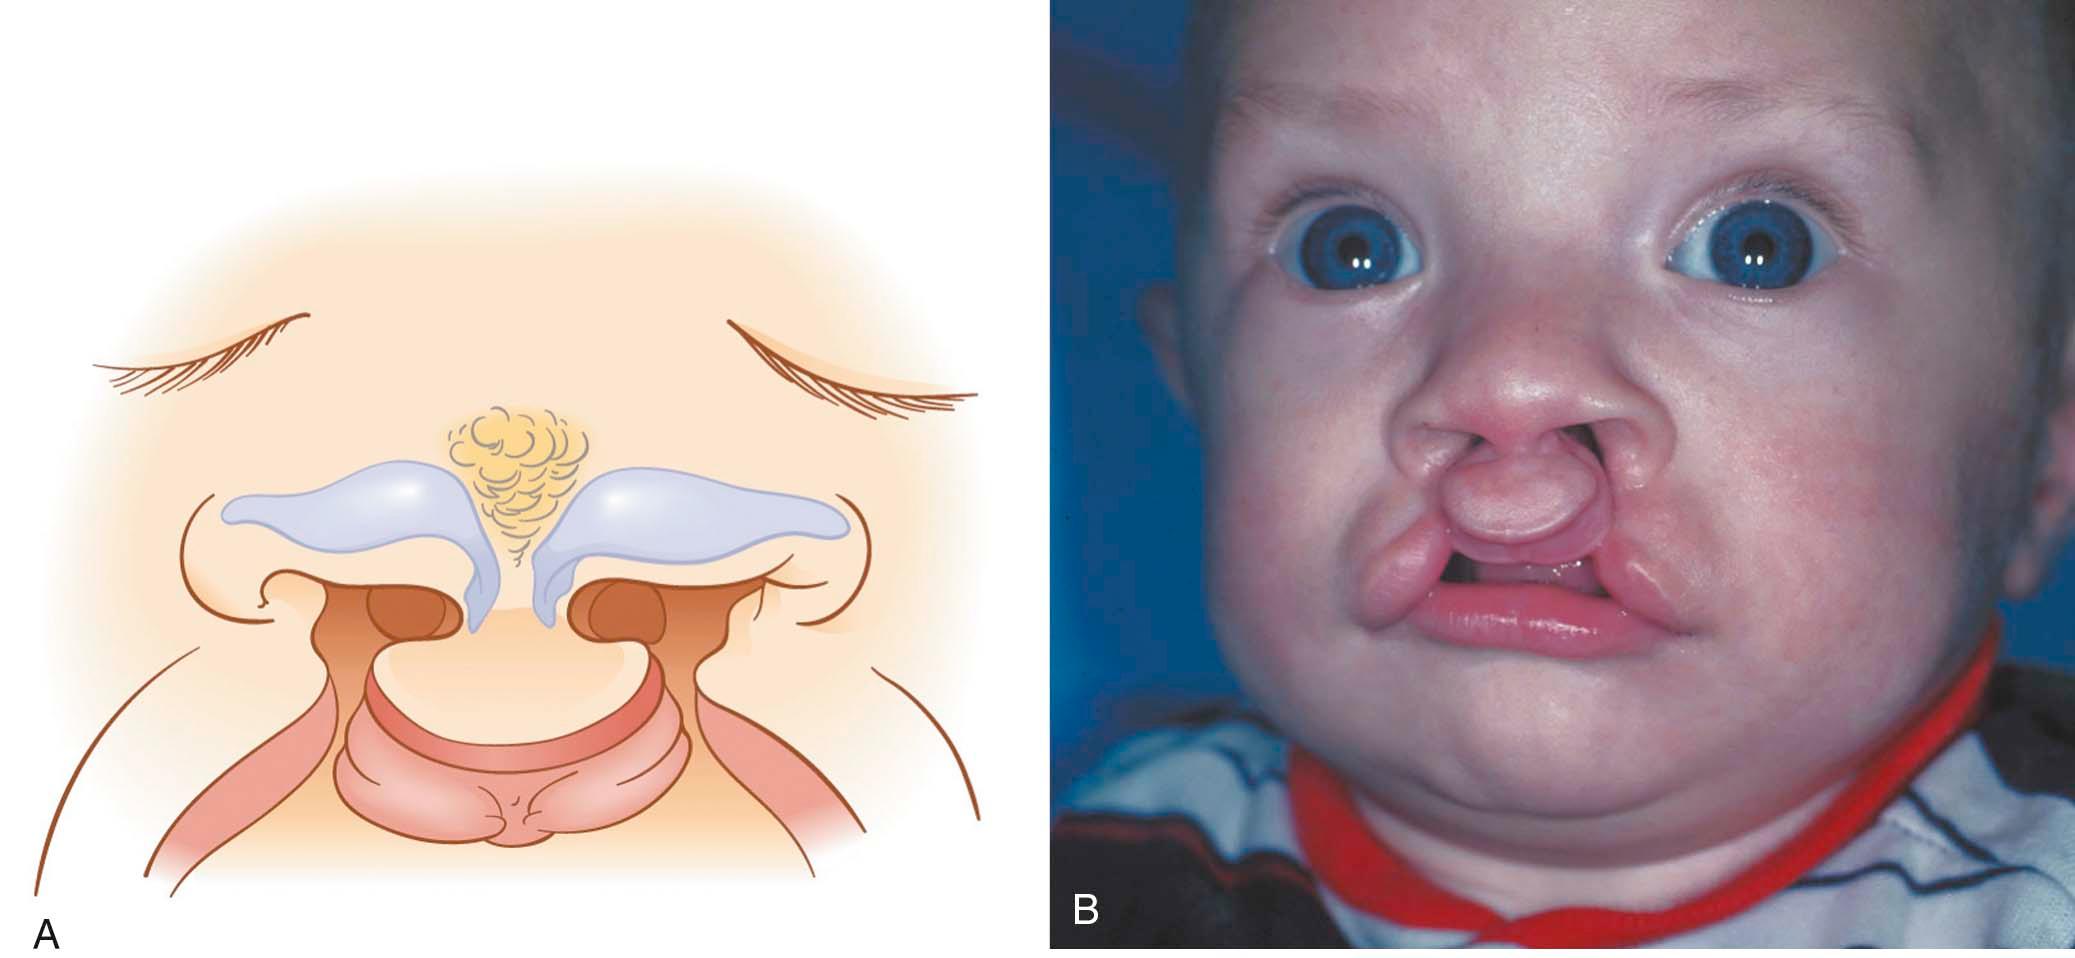 Figure 34-5, A, B, Schematic diagram and photograph of a patient with bilateral complete cleft lip deformity. The medial crus of each side of the nose is shorter and the lateral crus longer than in unaffected alar cartilage.